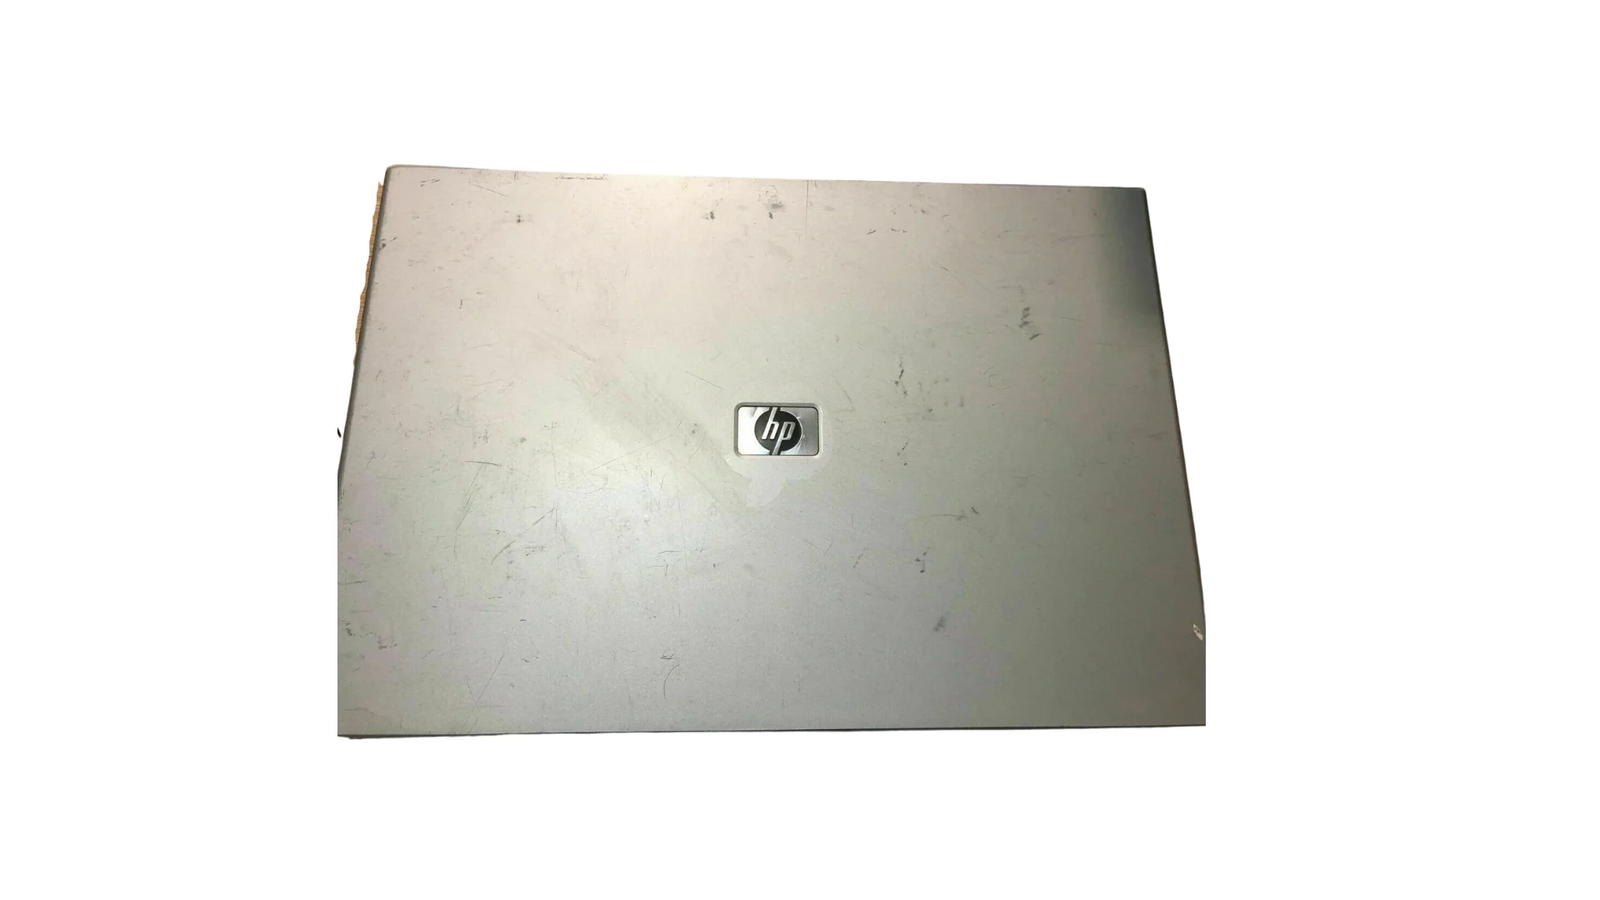 HP Pavilion DV8000 screen - For Parts